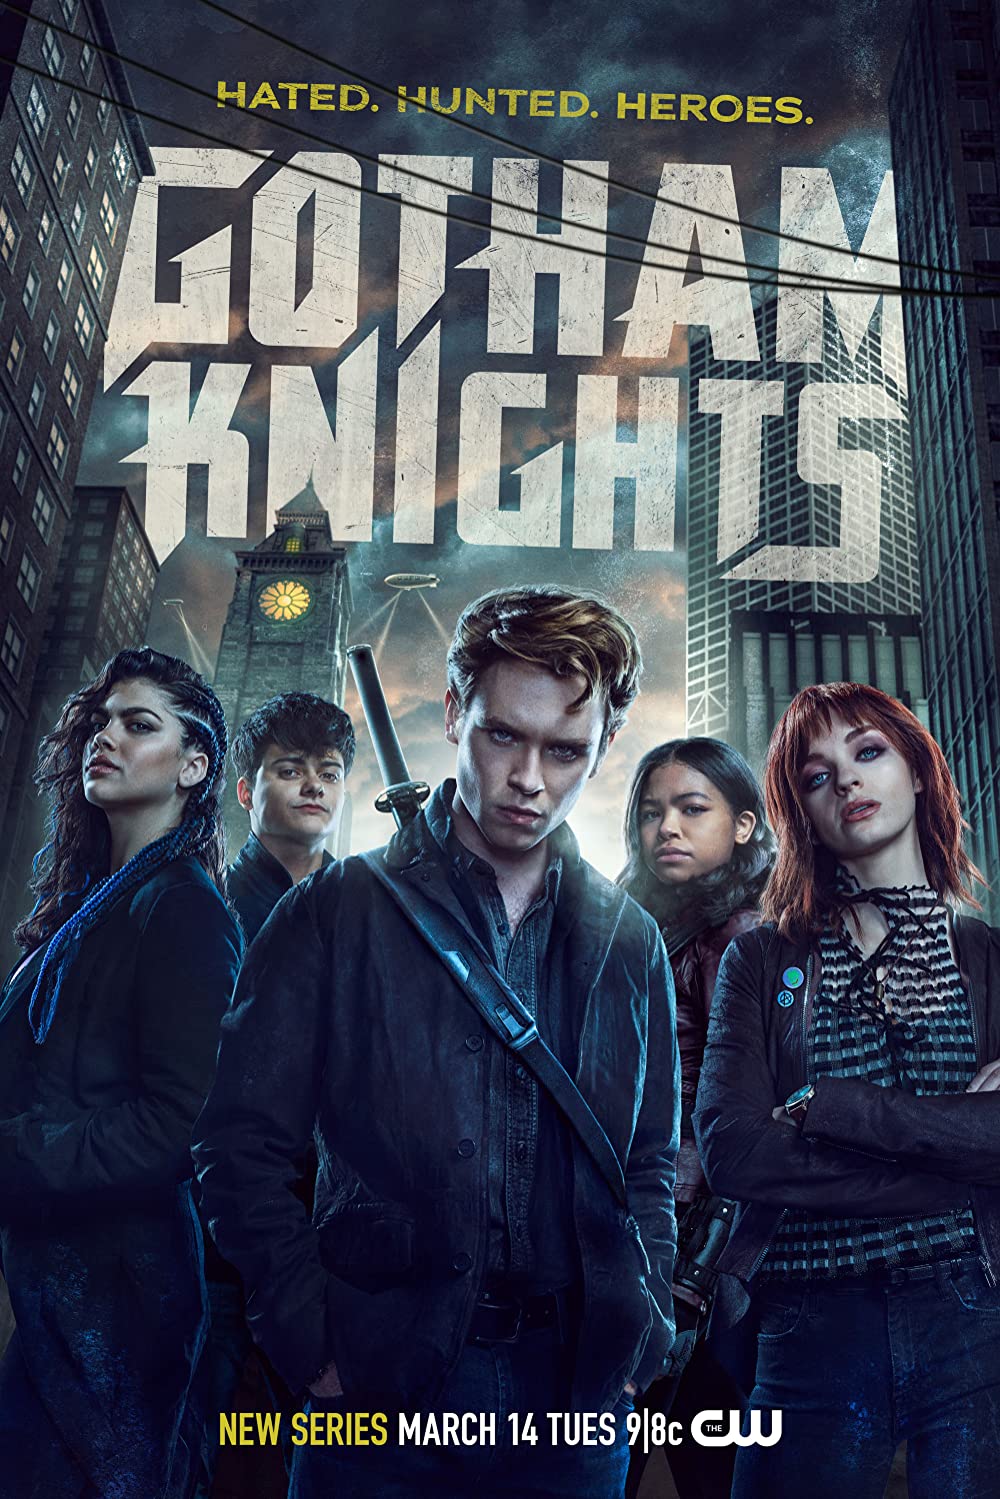 Poster for Gotham Knights on the CW network starting March 14th 2023. Above the Gotham Knights logo it says "Hated. Hunted. Heroes." And the poster shows Harper Row, Cullen Row, Turner Hayes, Carrie Kelley, and Duella, staning in Gotham City